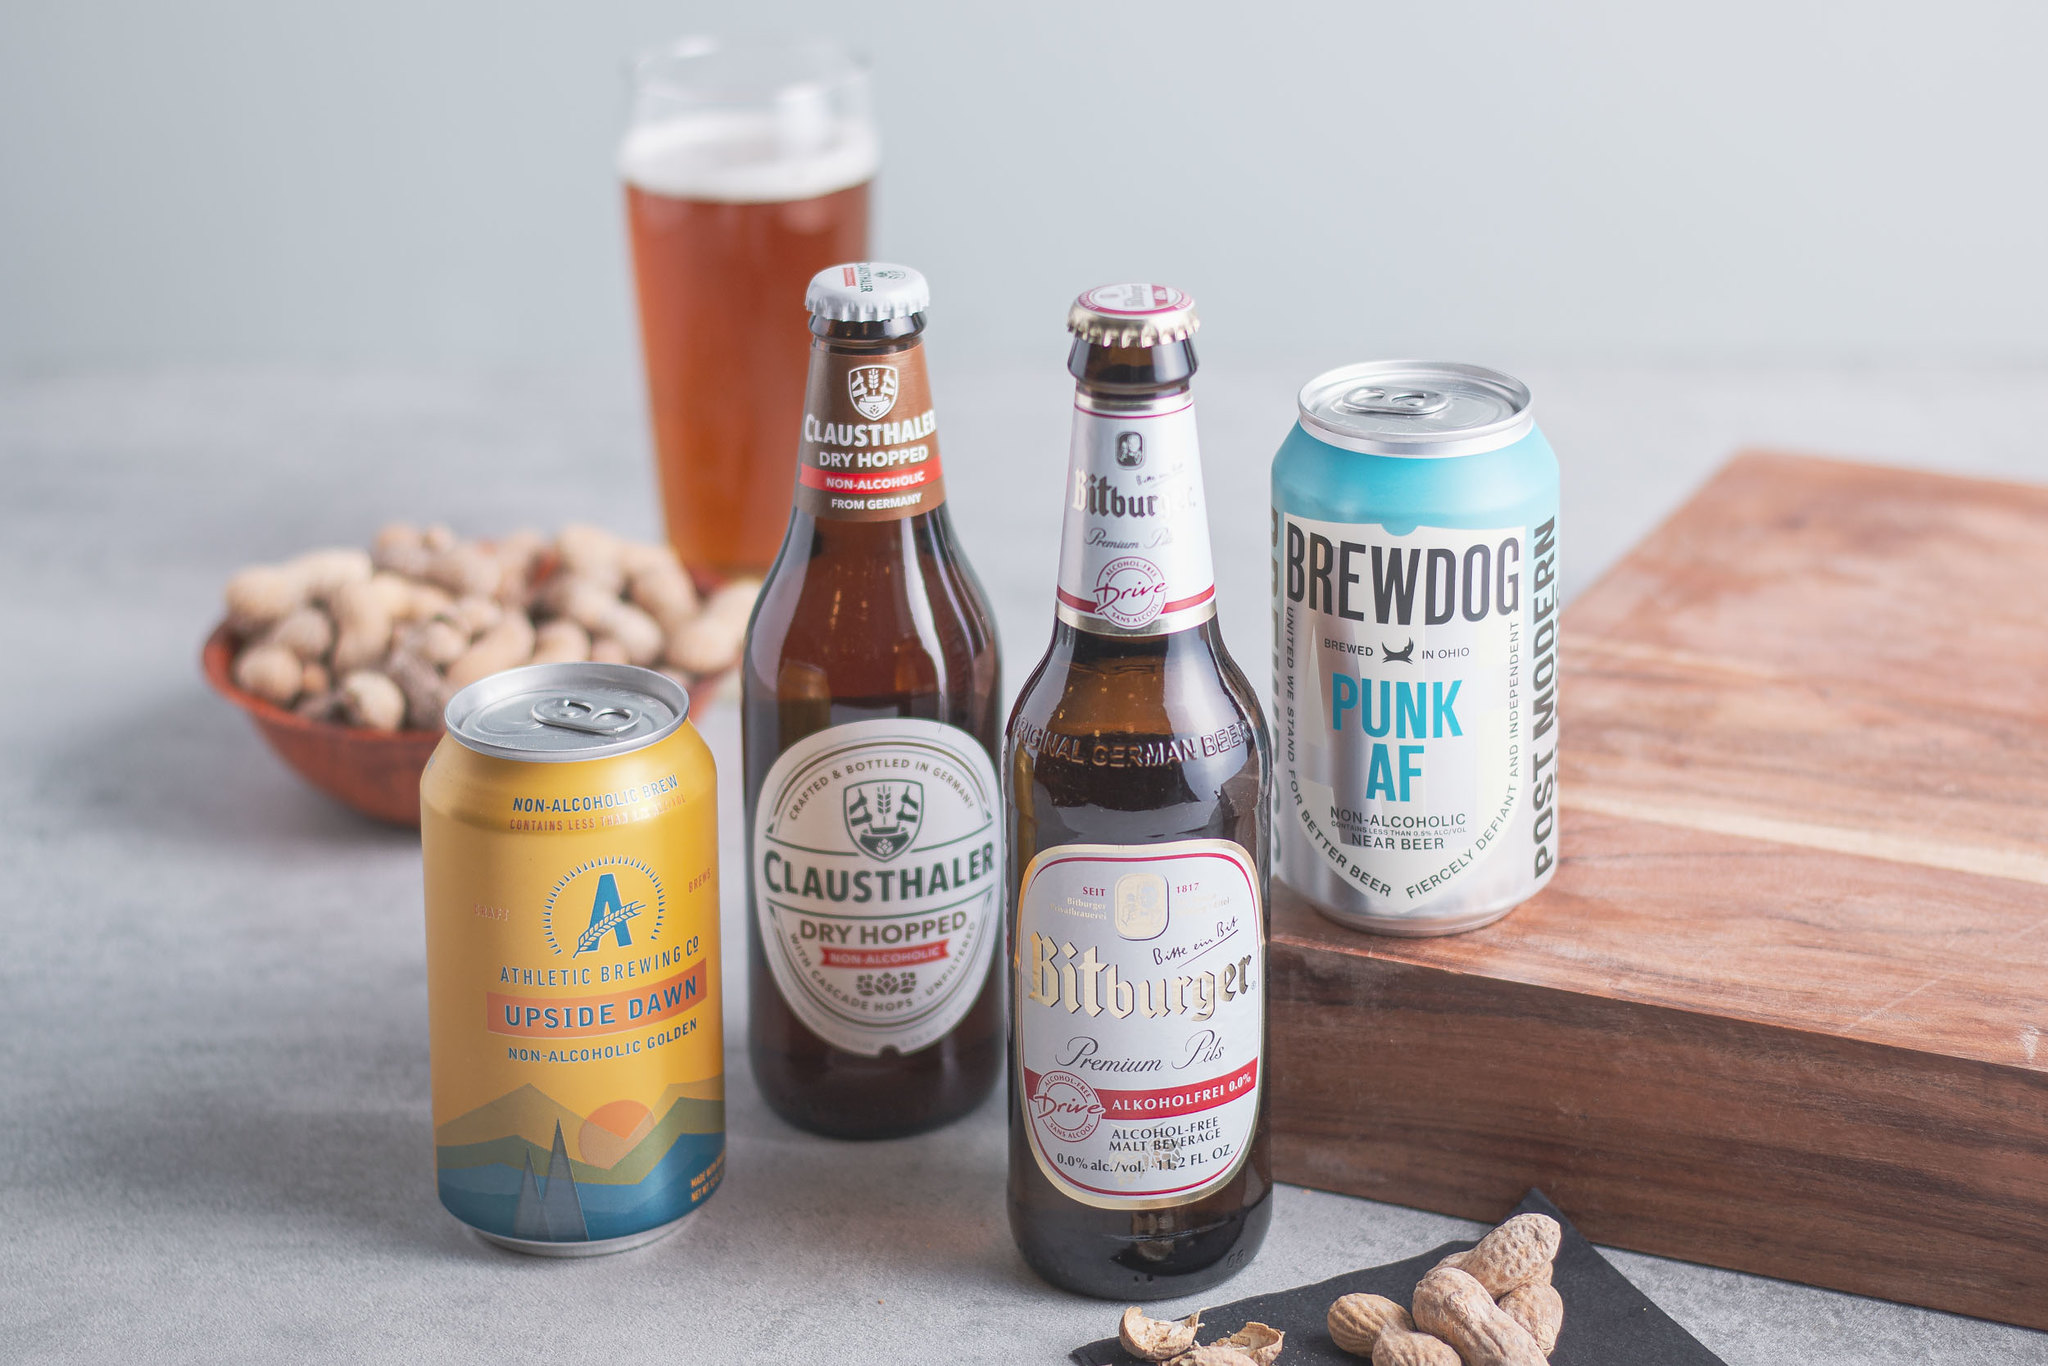 Athletic Lager, Alcohol-Free Beer